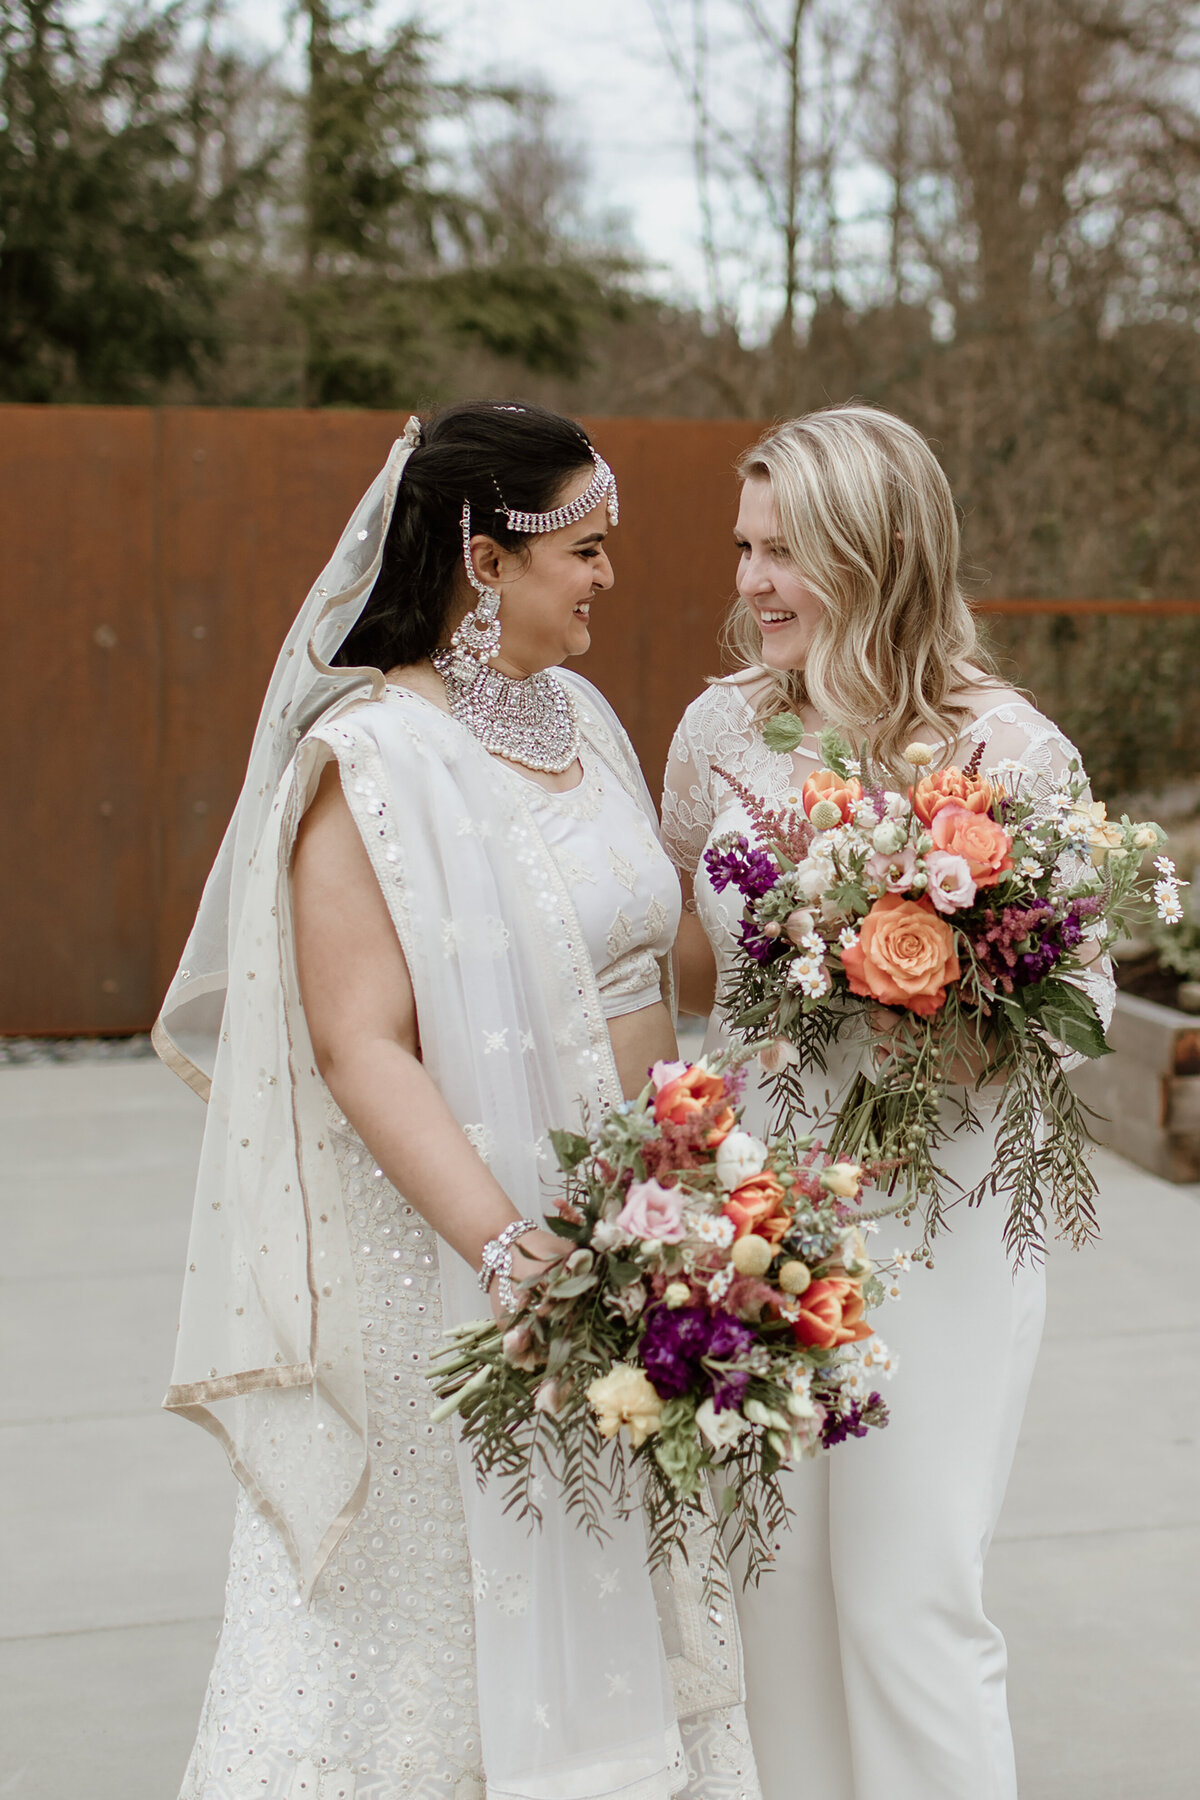 A sweet smiling moment of an LGBTQ+ couple, Indian Bride at Novelty Hill-Januik Winery in Woodinville Washington. Captured by Fort Worth wedding photographer, Megan Christine Studio